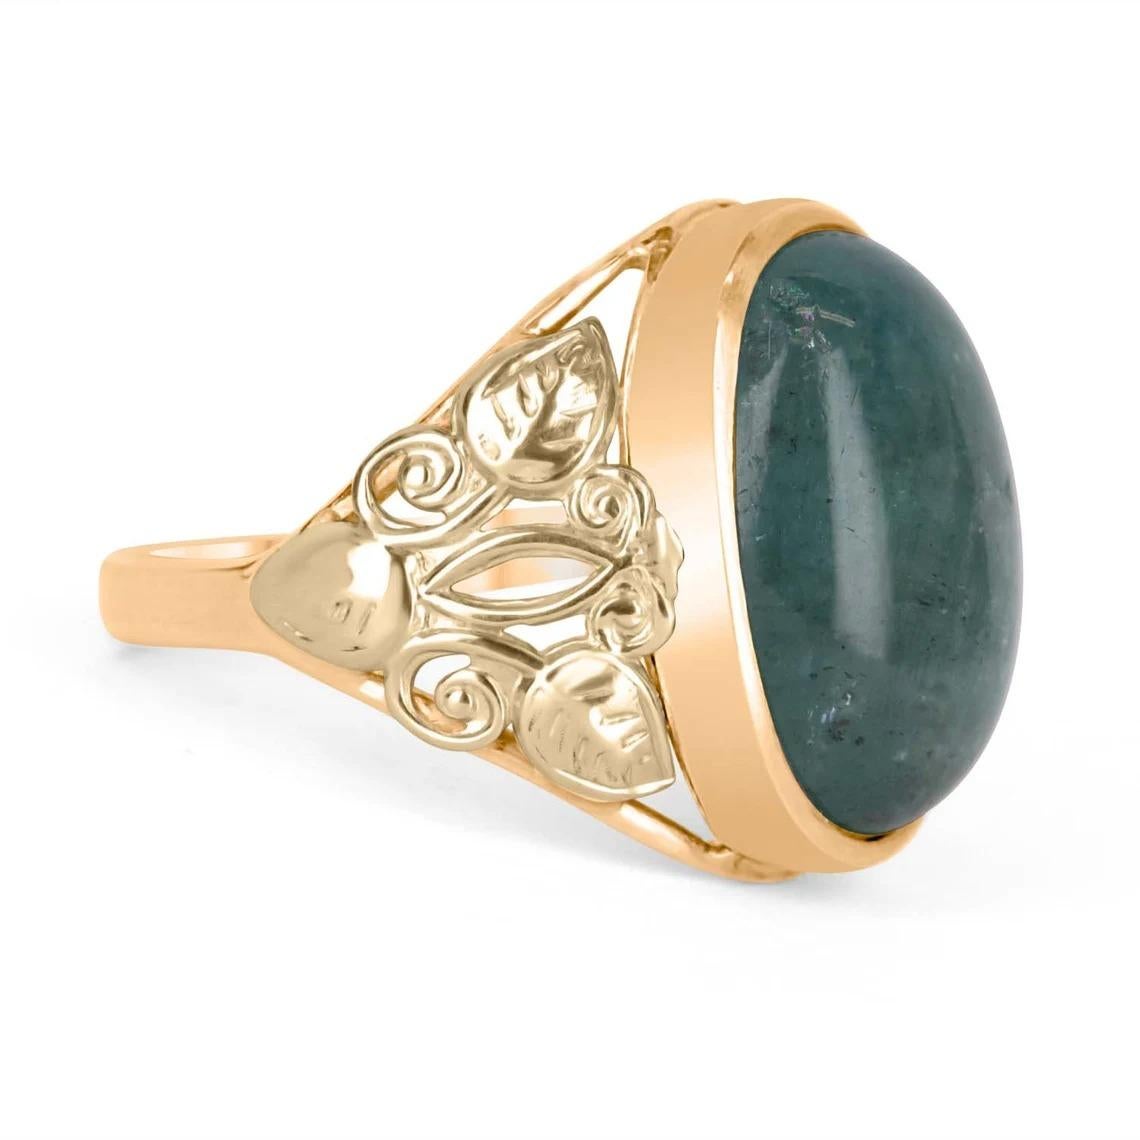 Featured is this exquisite barrel cabochon solitaire ring. The center stone has a full 12.56-carats of a natural barrel cabochon with light bluish-green color. That large stone is set into a fully custom, floral 14K yellow gold setting design. The